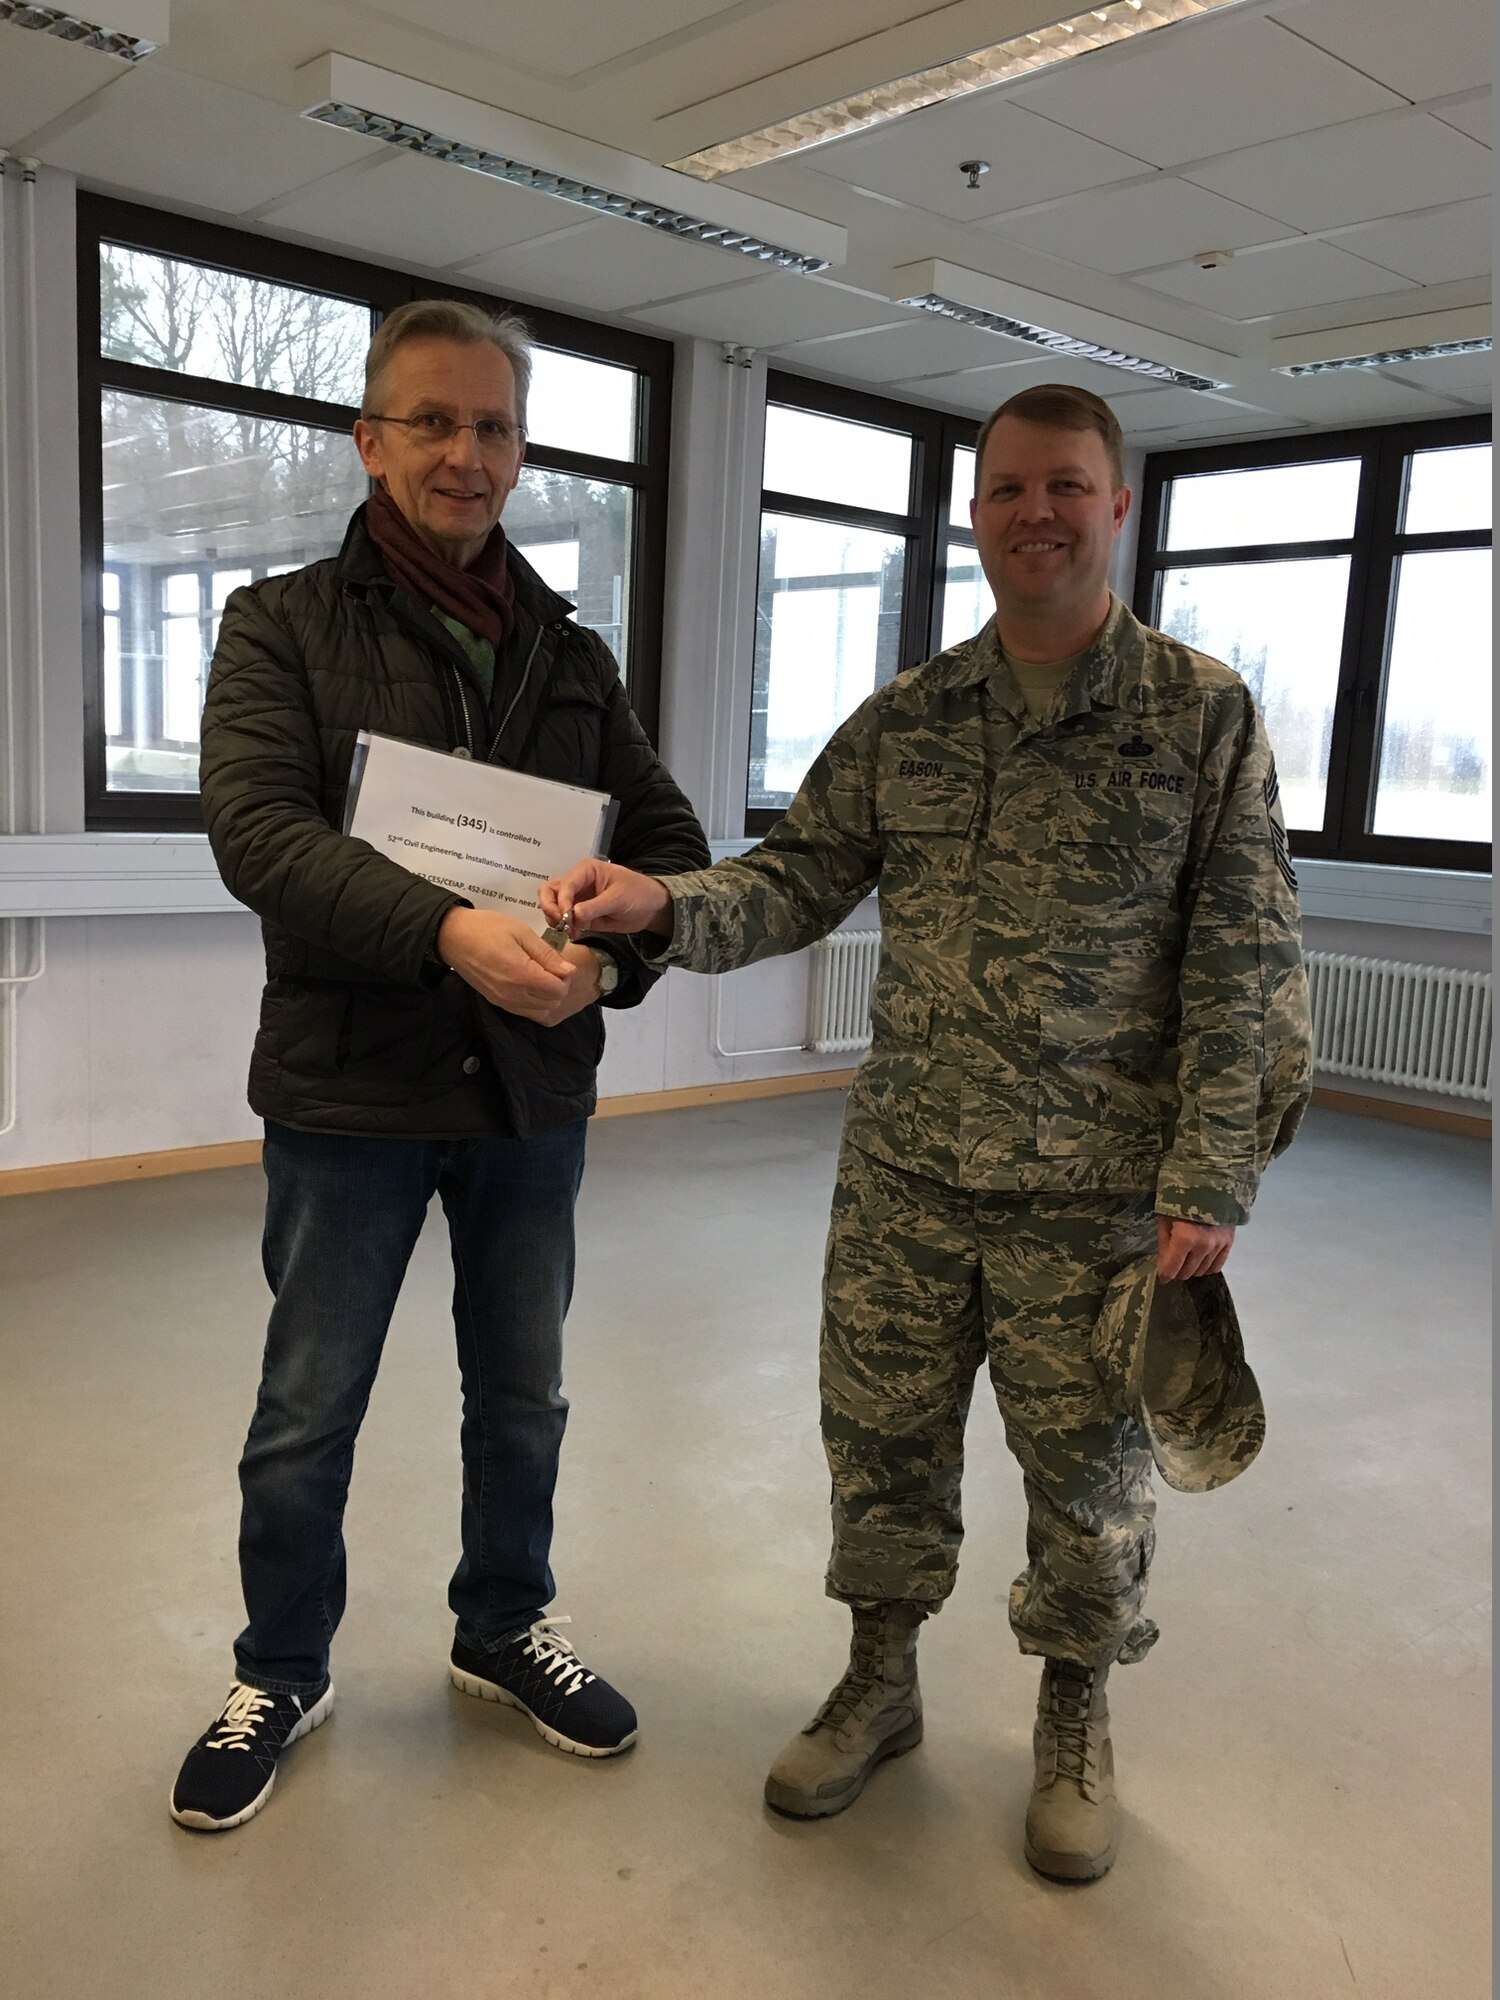 Chief Master Sgt. Jonathan Eason, former 606th Air Control Squadron chief enlisted manager Detachment 1, hands over the keys to building 345, the former location of the 606th ACS to Josef Ehlenz, 52nd Civil Engineer Squadron base property specialist, at Spangdahlem Air Base, Germany, March 8, 2017. (Courtesy photo)